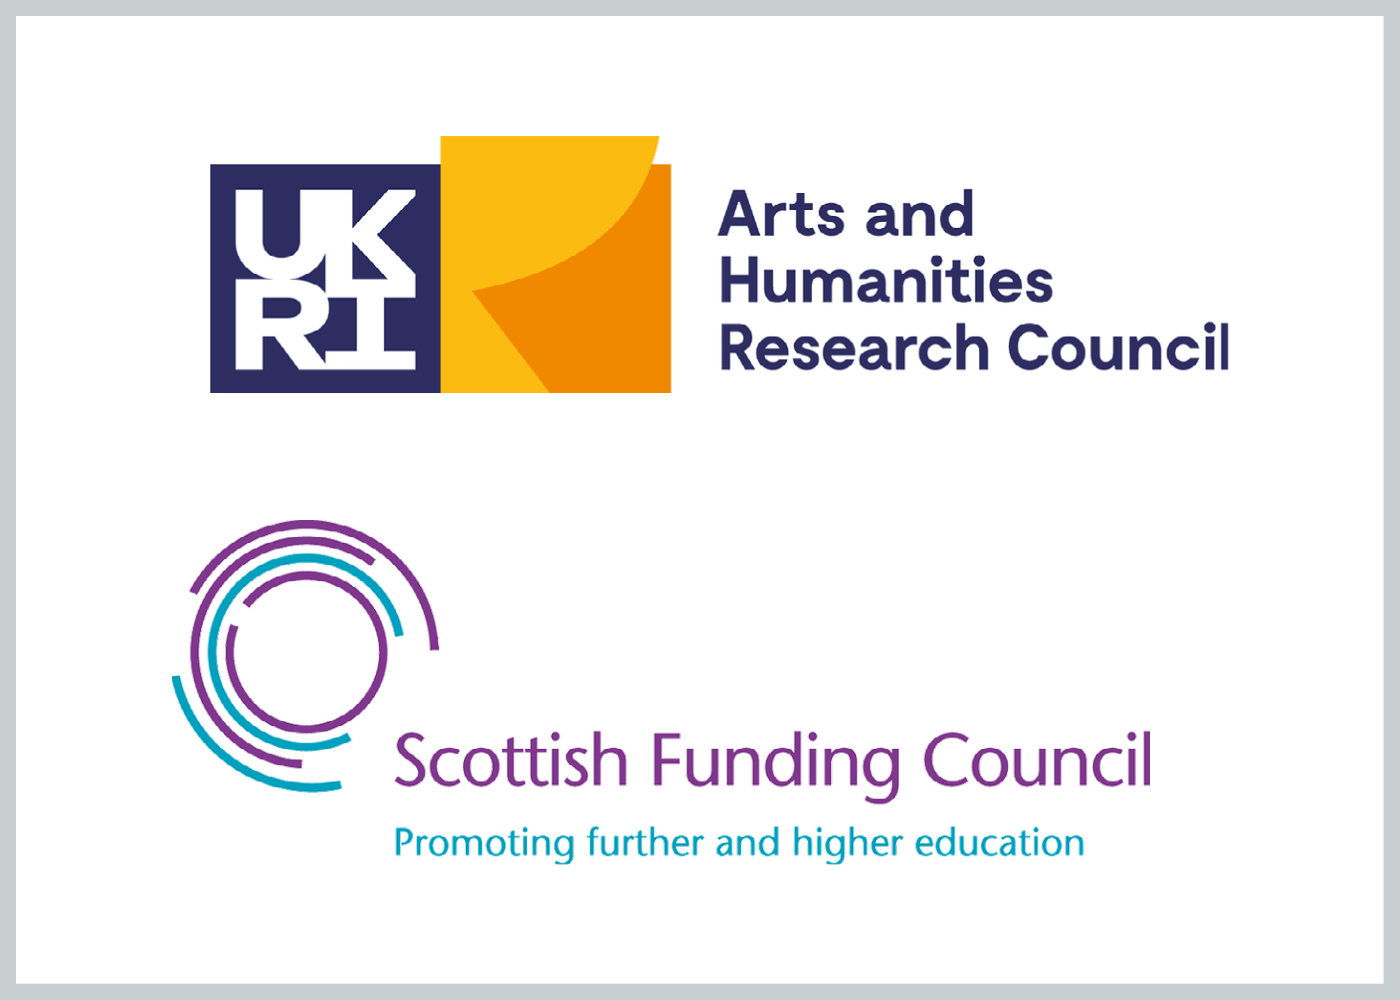 Arts and Humanities Research Council (AHRC) & Scottish Funding Council (SFC) logo